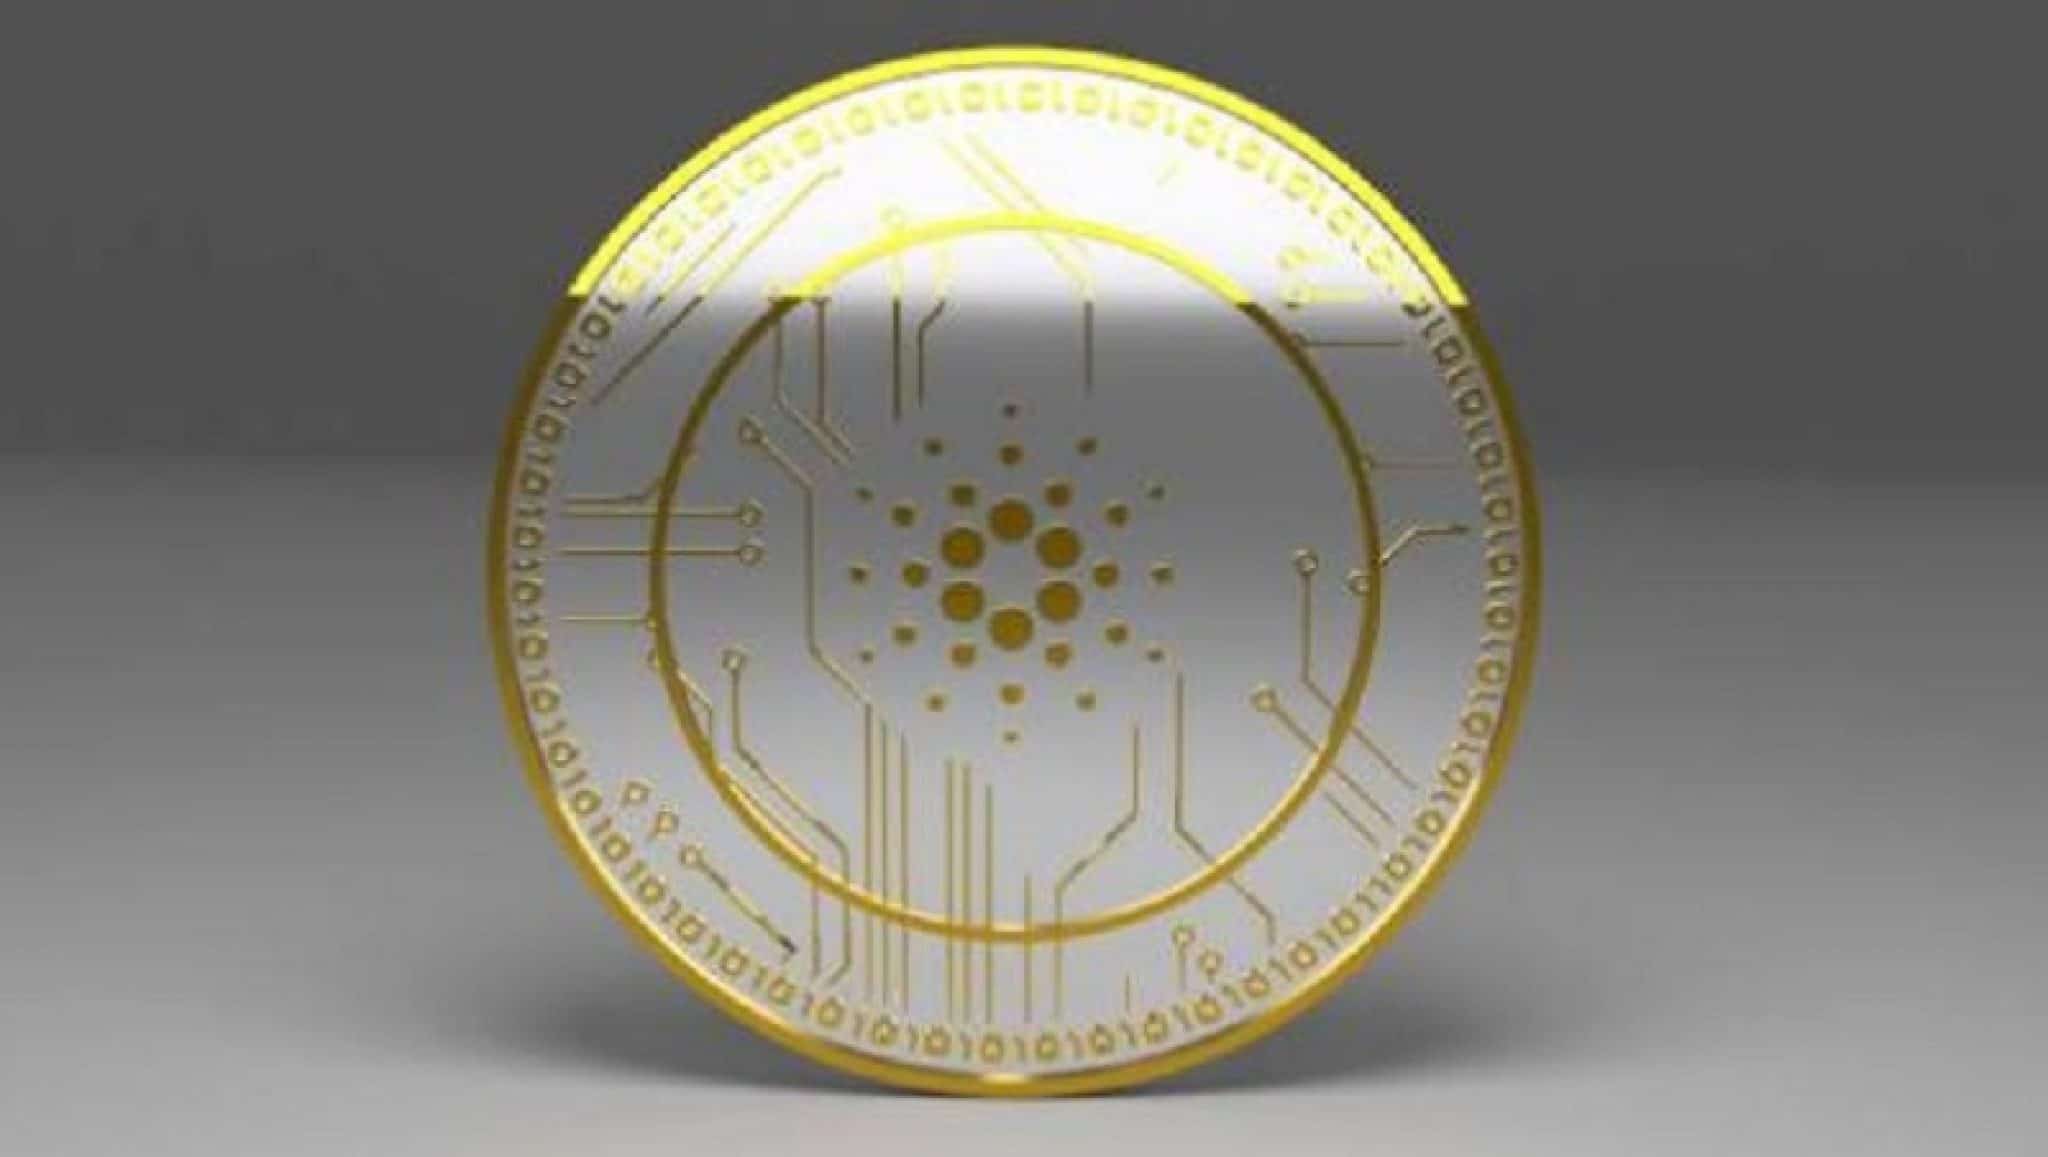 Cardano Coin Facts - 11 Things You Didn't Know About Cardano